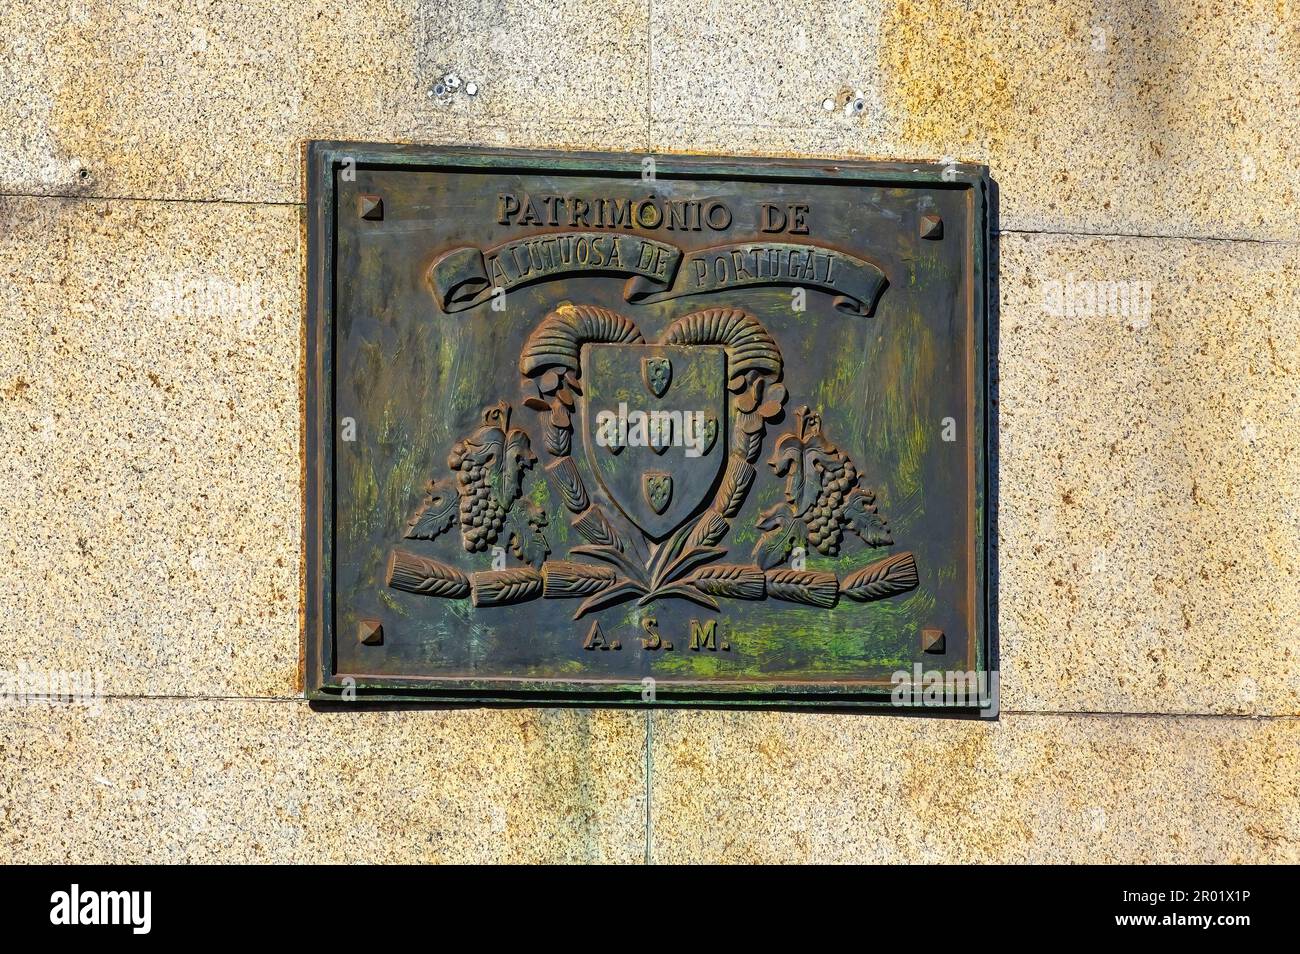 Old historical plaque with a coat of arms and the text 'Patrimony' or heritage. Stock Photo